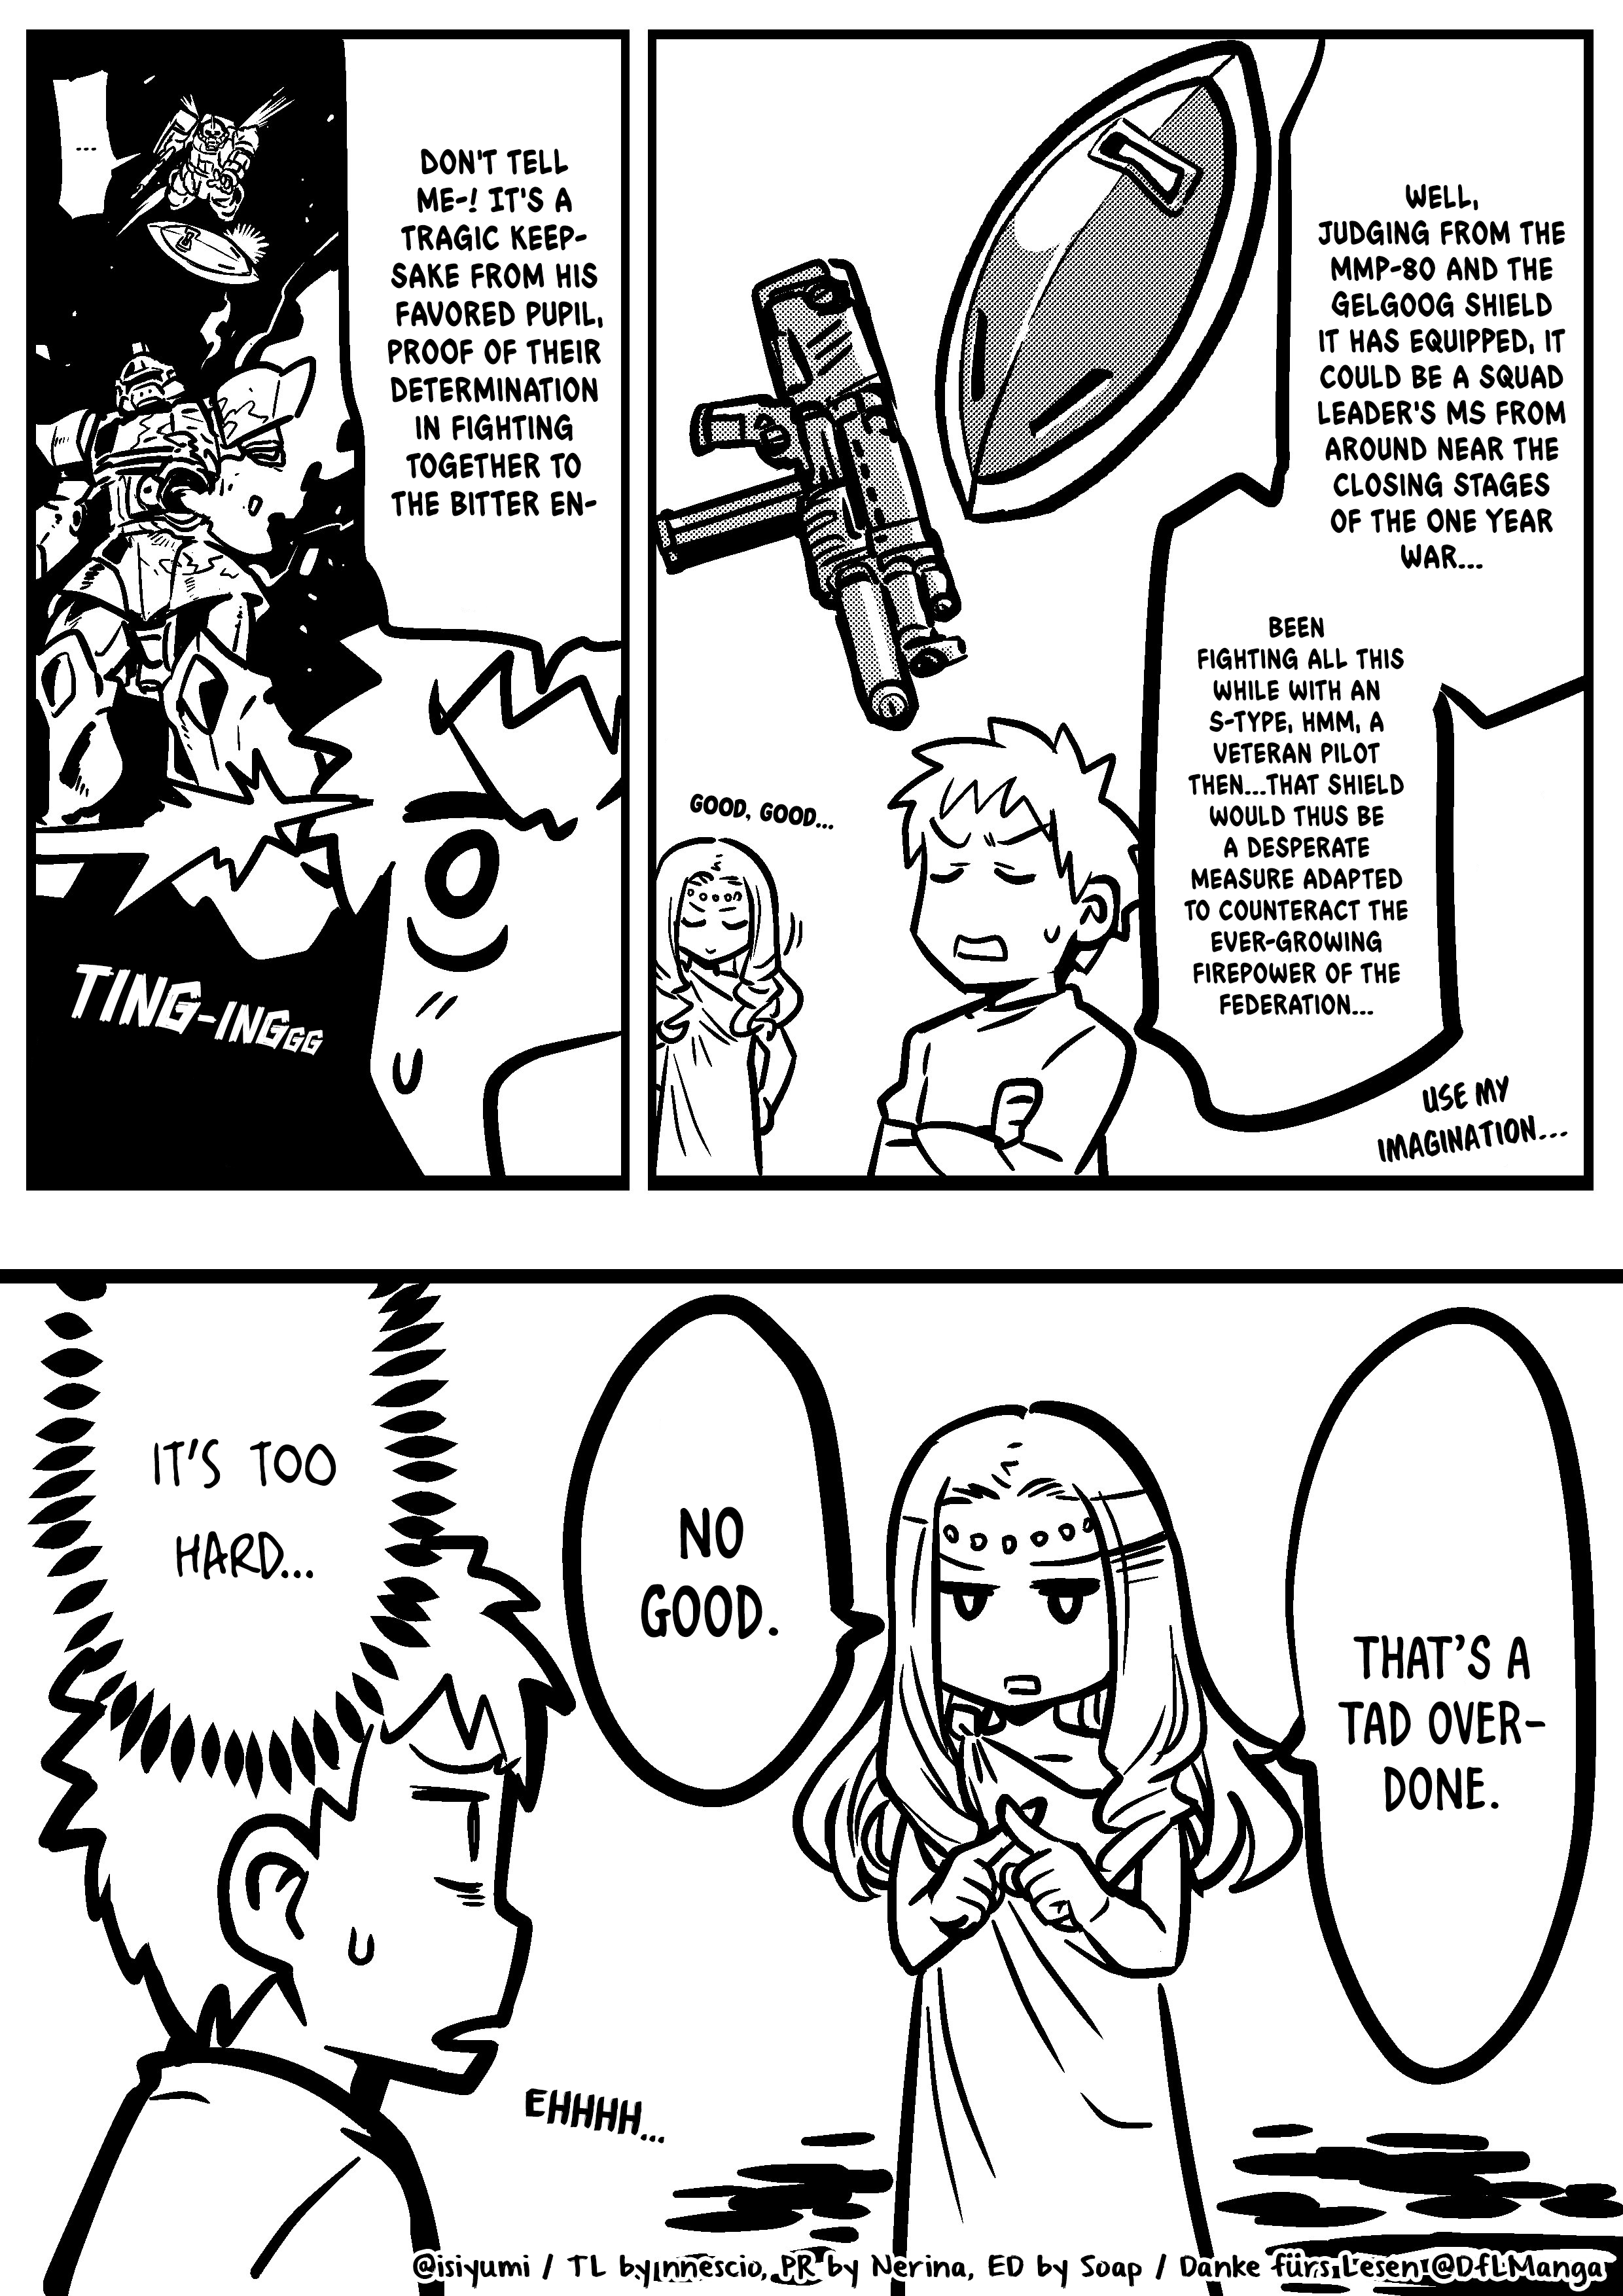 Goddess Of The G-Spring - Page 2